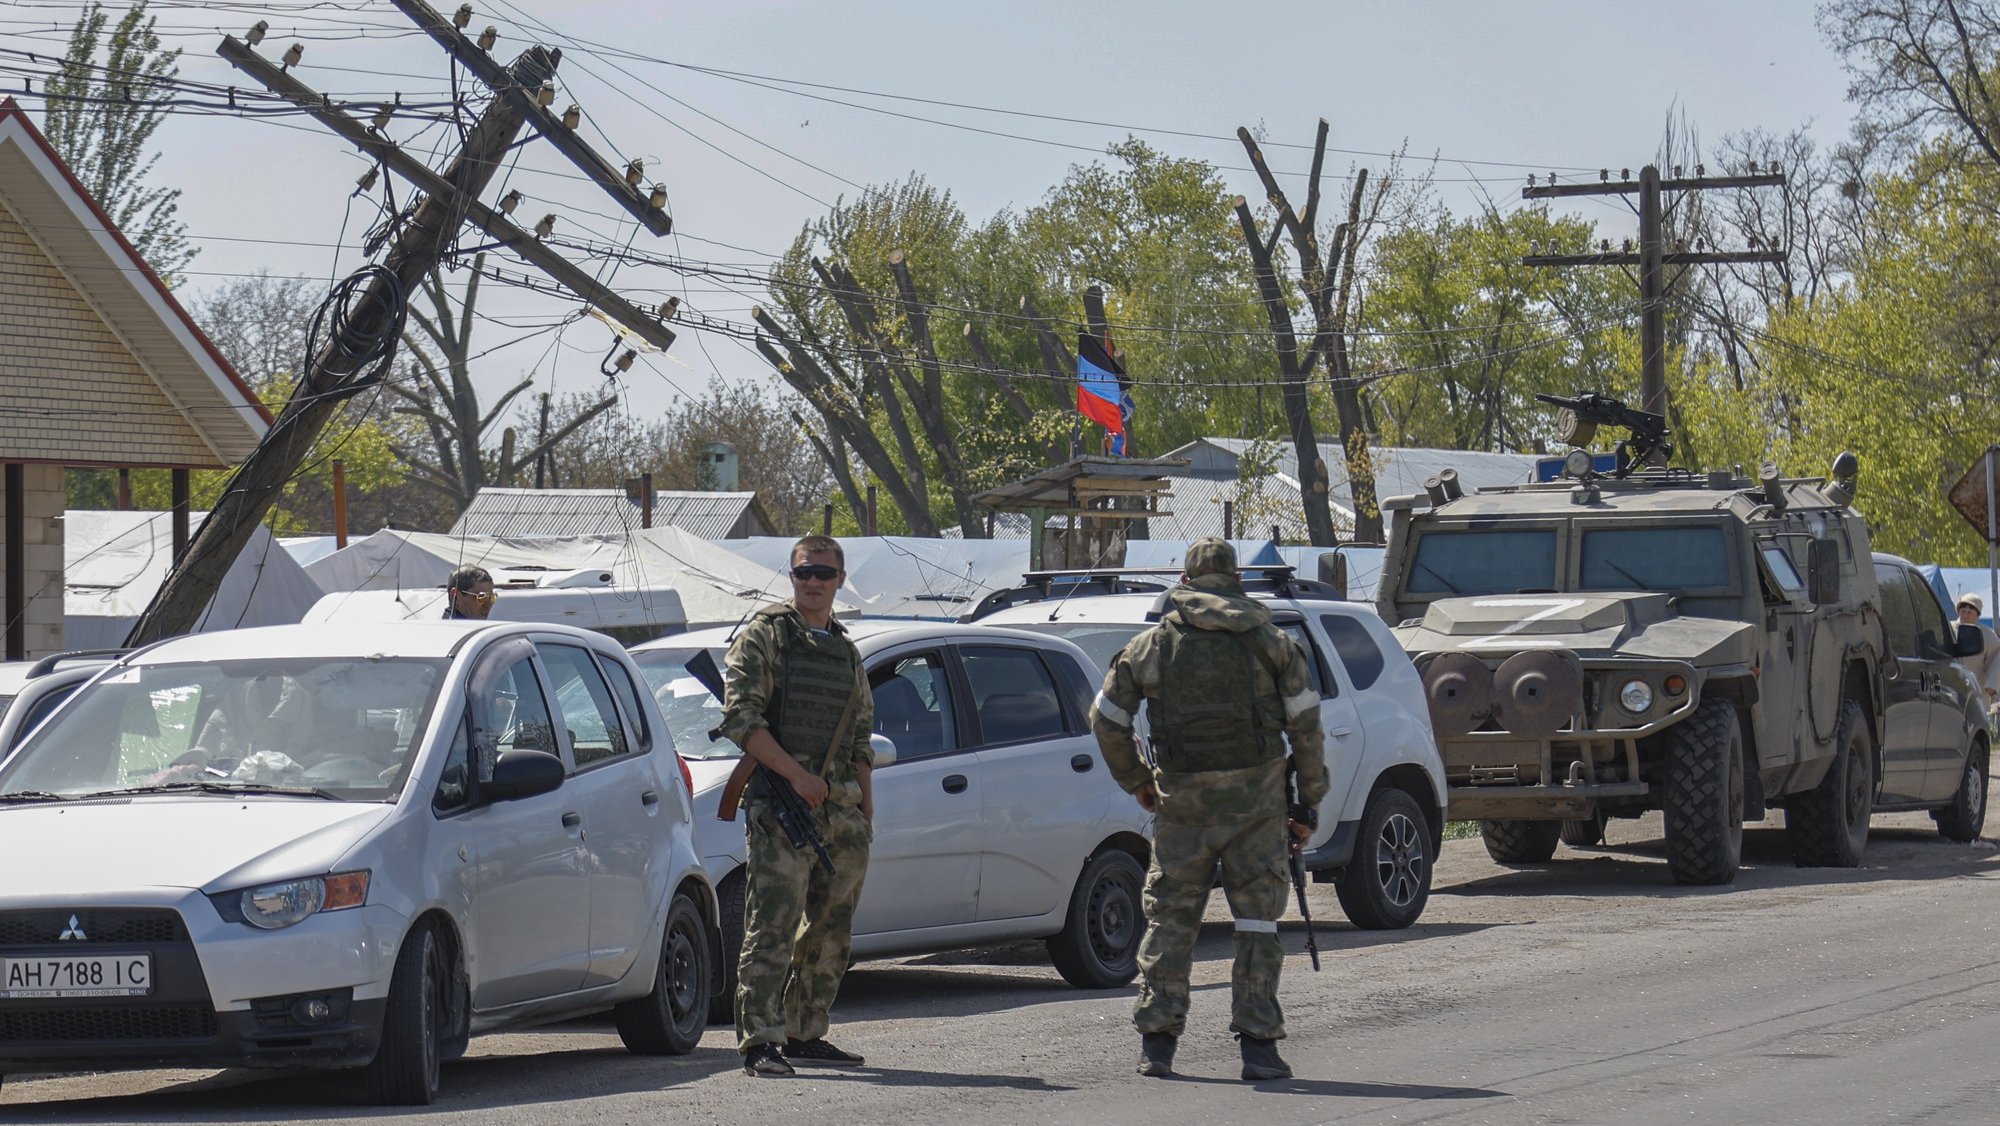 epa09932615 Russian servicemen stand guard at the temporary accommodation center for people was evacuated from Azovstal, in Bezimenoye village near Mariupol, Ukraine, 07 May 2022. According to the Interdepartmental Coordinating Headquarters of the Russian Federation for Humanitarian Response, 51 civilians, including 11 children, were evacuated from the Azovstal plant between 05 and 07 May. On 24 February, Russian troops had entered Ukrainian territory in what the Russian president declared a &#039;special military operation&#039;, resulting in fighting and destruction in the country. According to data released by the United Nations High Commission for the Refugees (UNHCR) on 05 May, over 5.7 million refugees have fled Ukraine seeking safety, protection and assistance in neighboring countries.  EPA/ALESSANDRO GUERRA